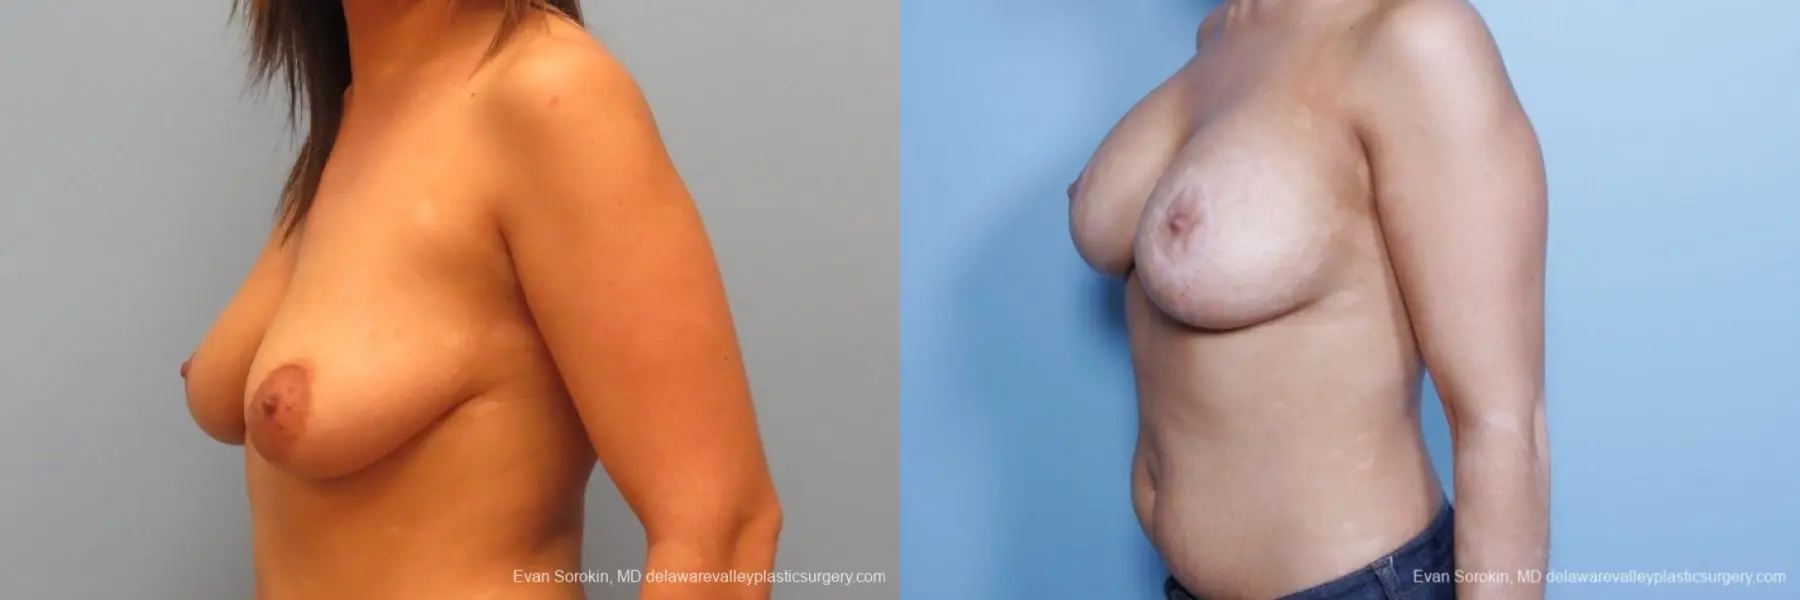 Philadelphia Breast Lift and Augmentation 8688 - Before and After 3